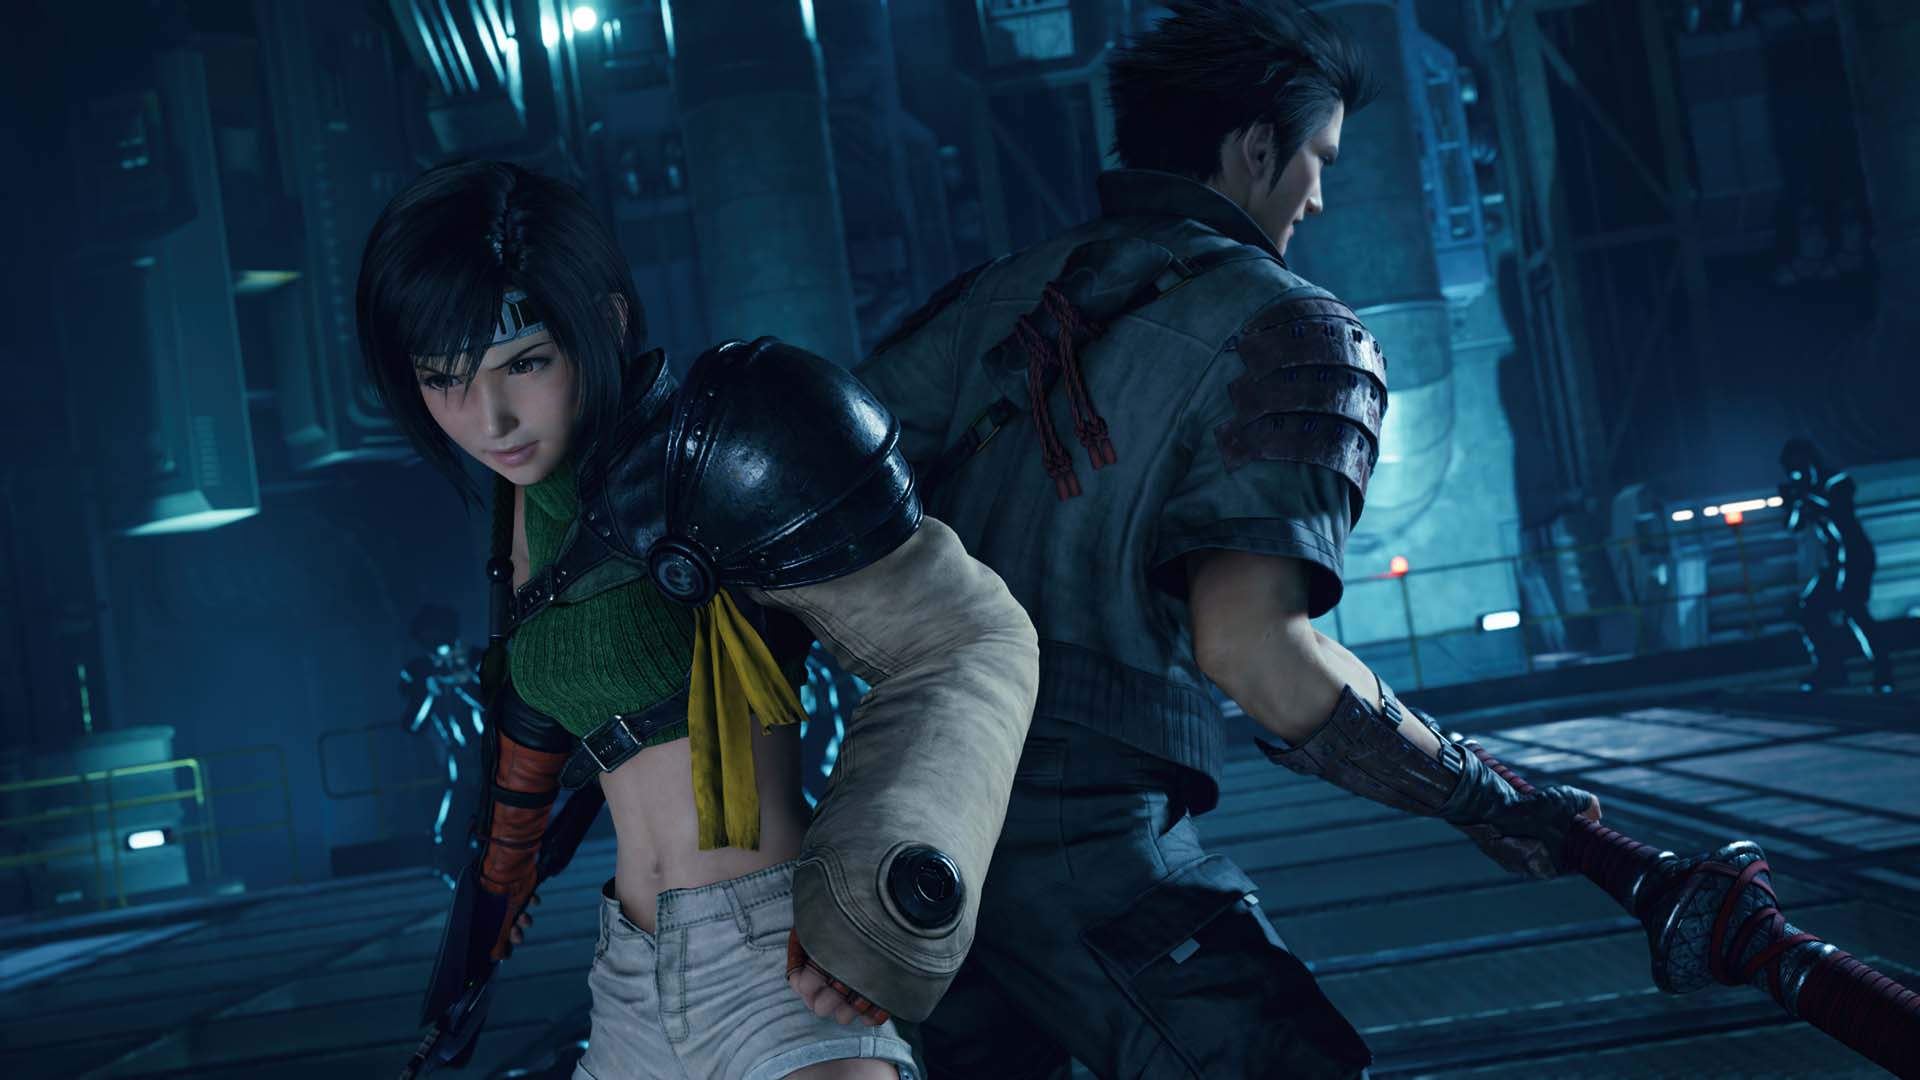 Final Fantasy VII Remake - EPISODE INTERmission (New Story Content Featuring Yuffie) DLC EU PS5 CD Key